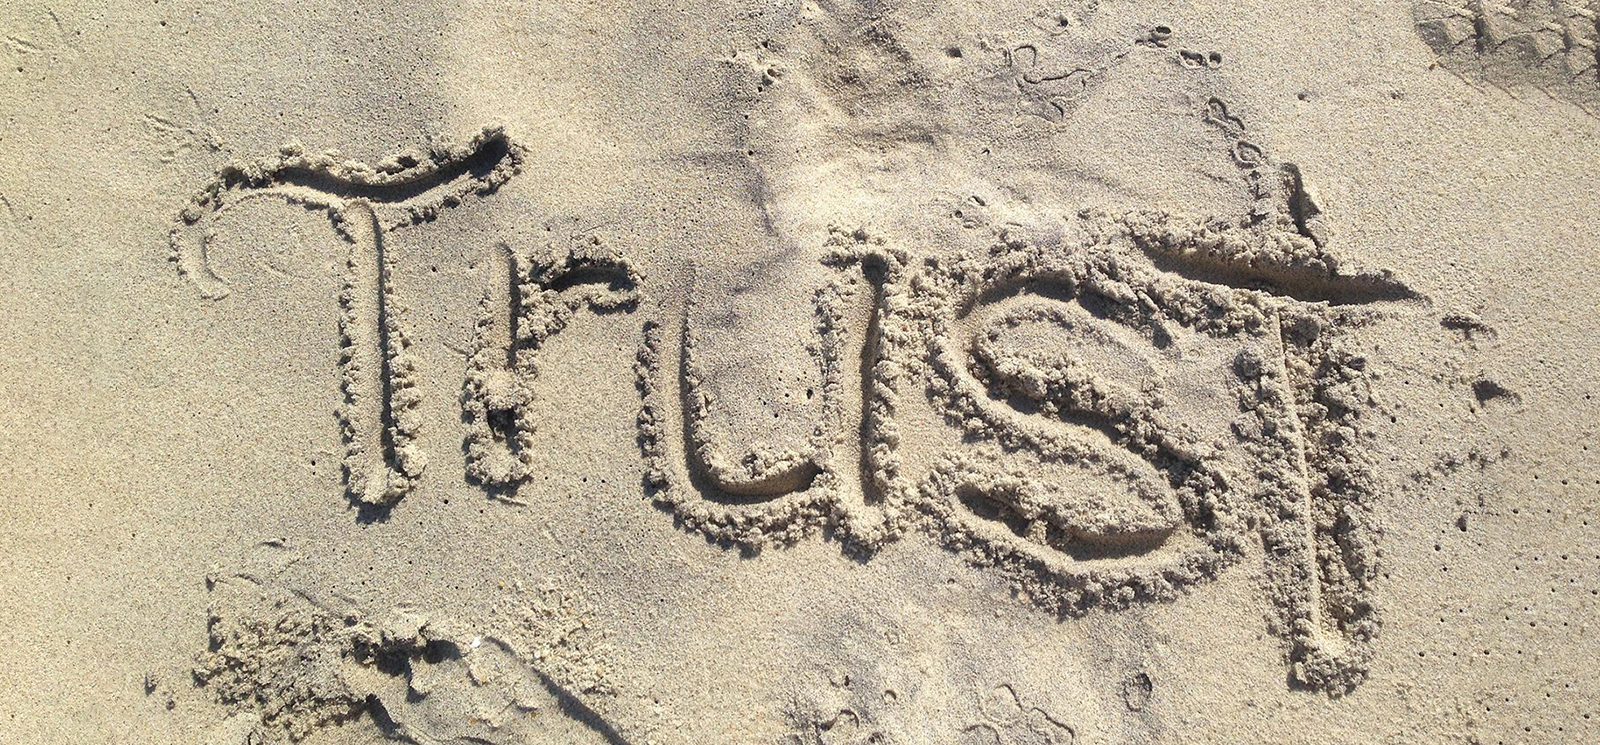 Photo of the word "Trust" written in the sand